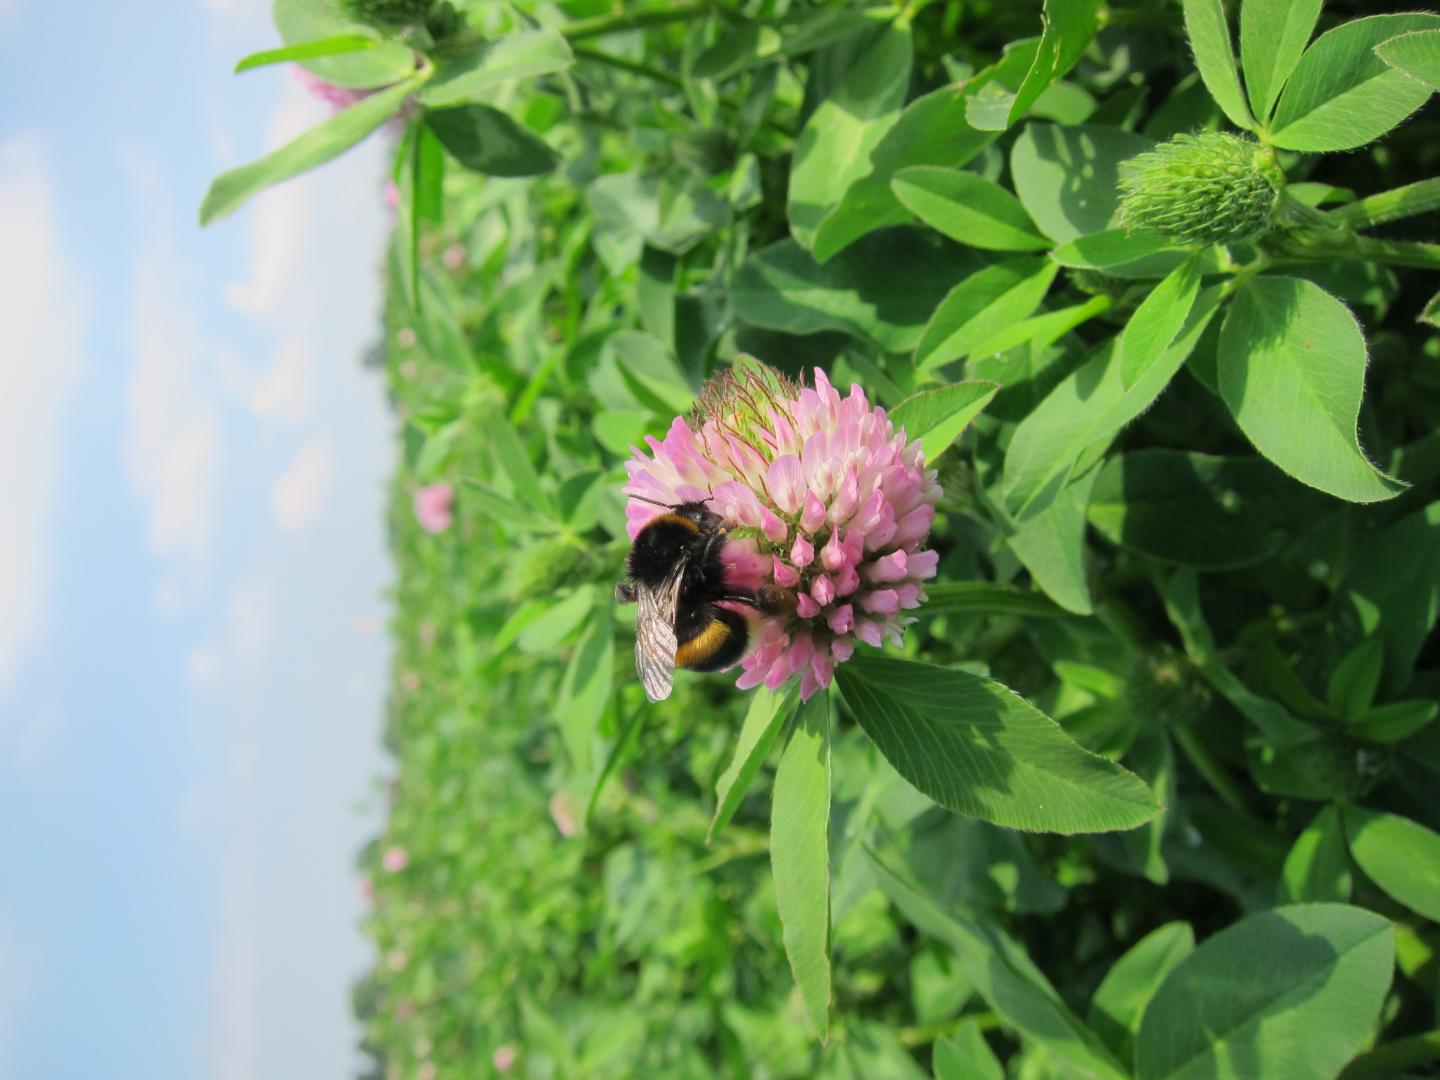 On Balance, Some Neonicotinoid Pesticides Could Benefit Bees